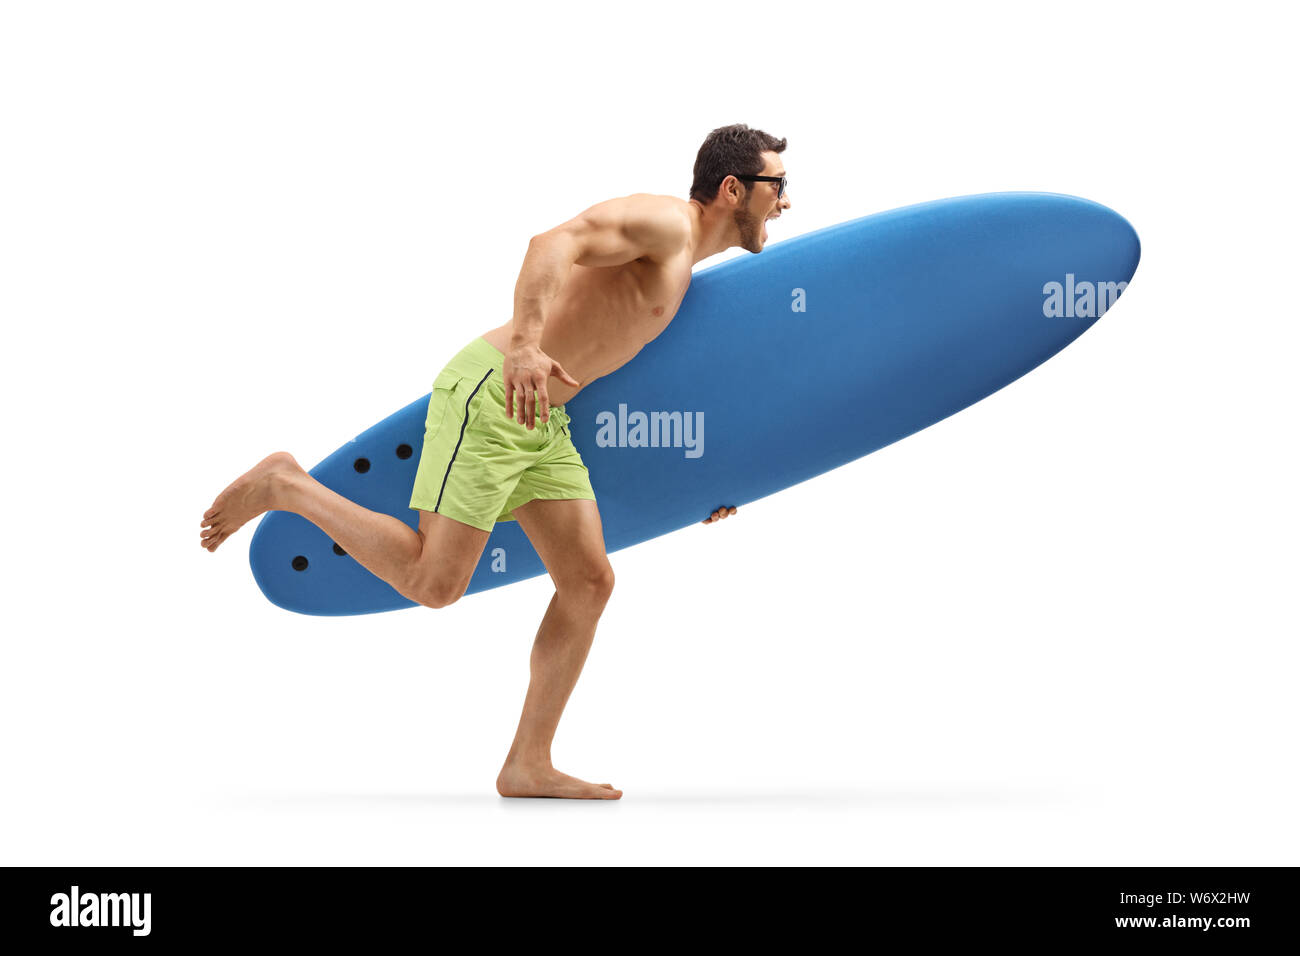 Full length profile shot of a young excited man holding a surfing board and running isolated on white background Stock Photo